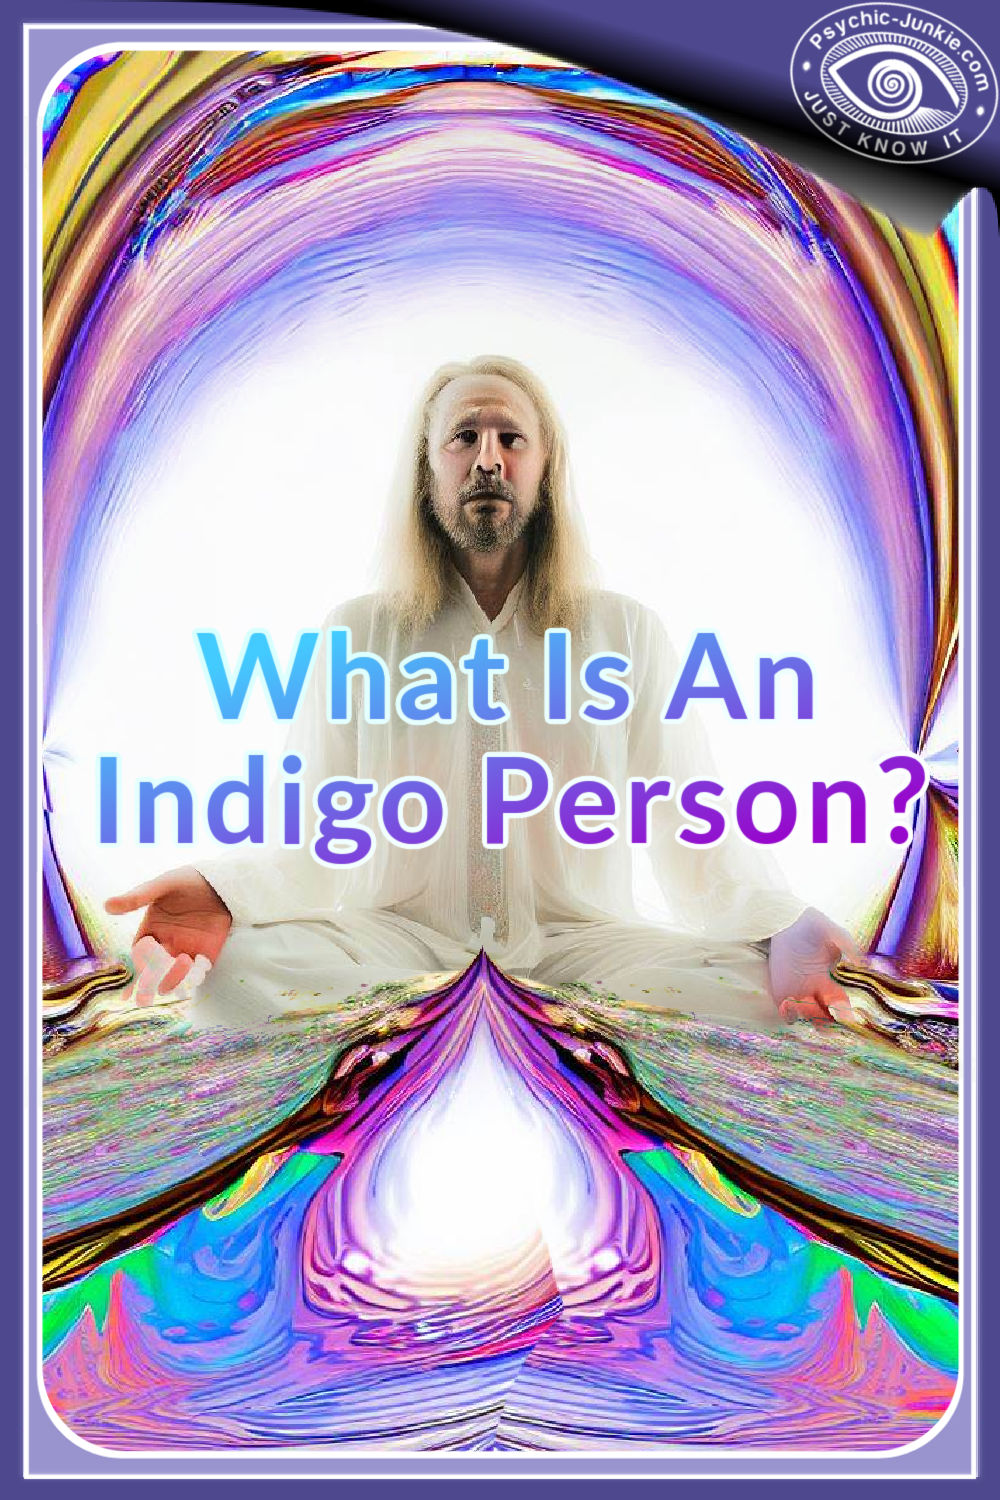 What is an Indigo person really like?